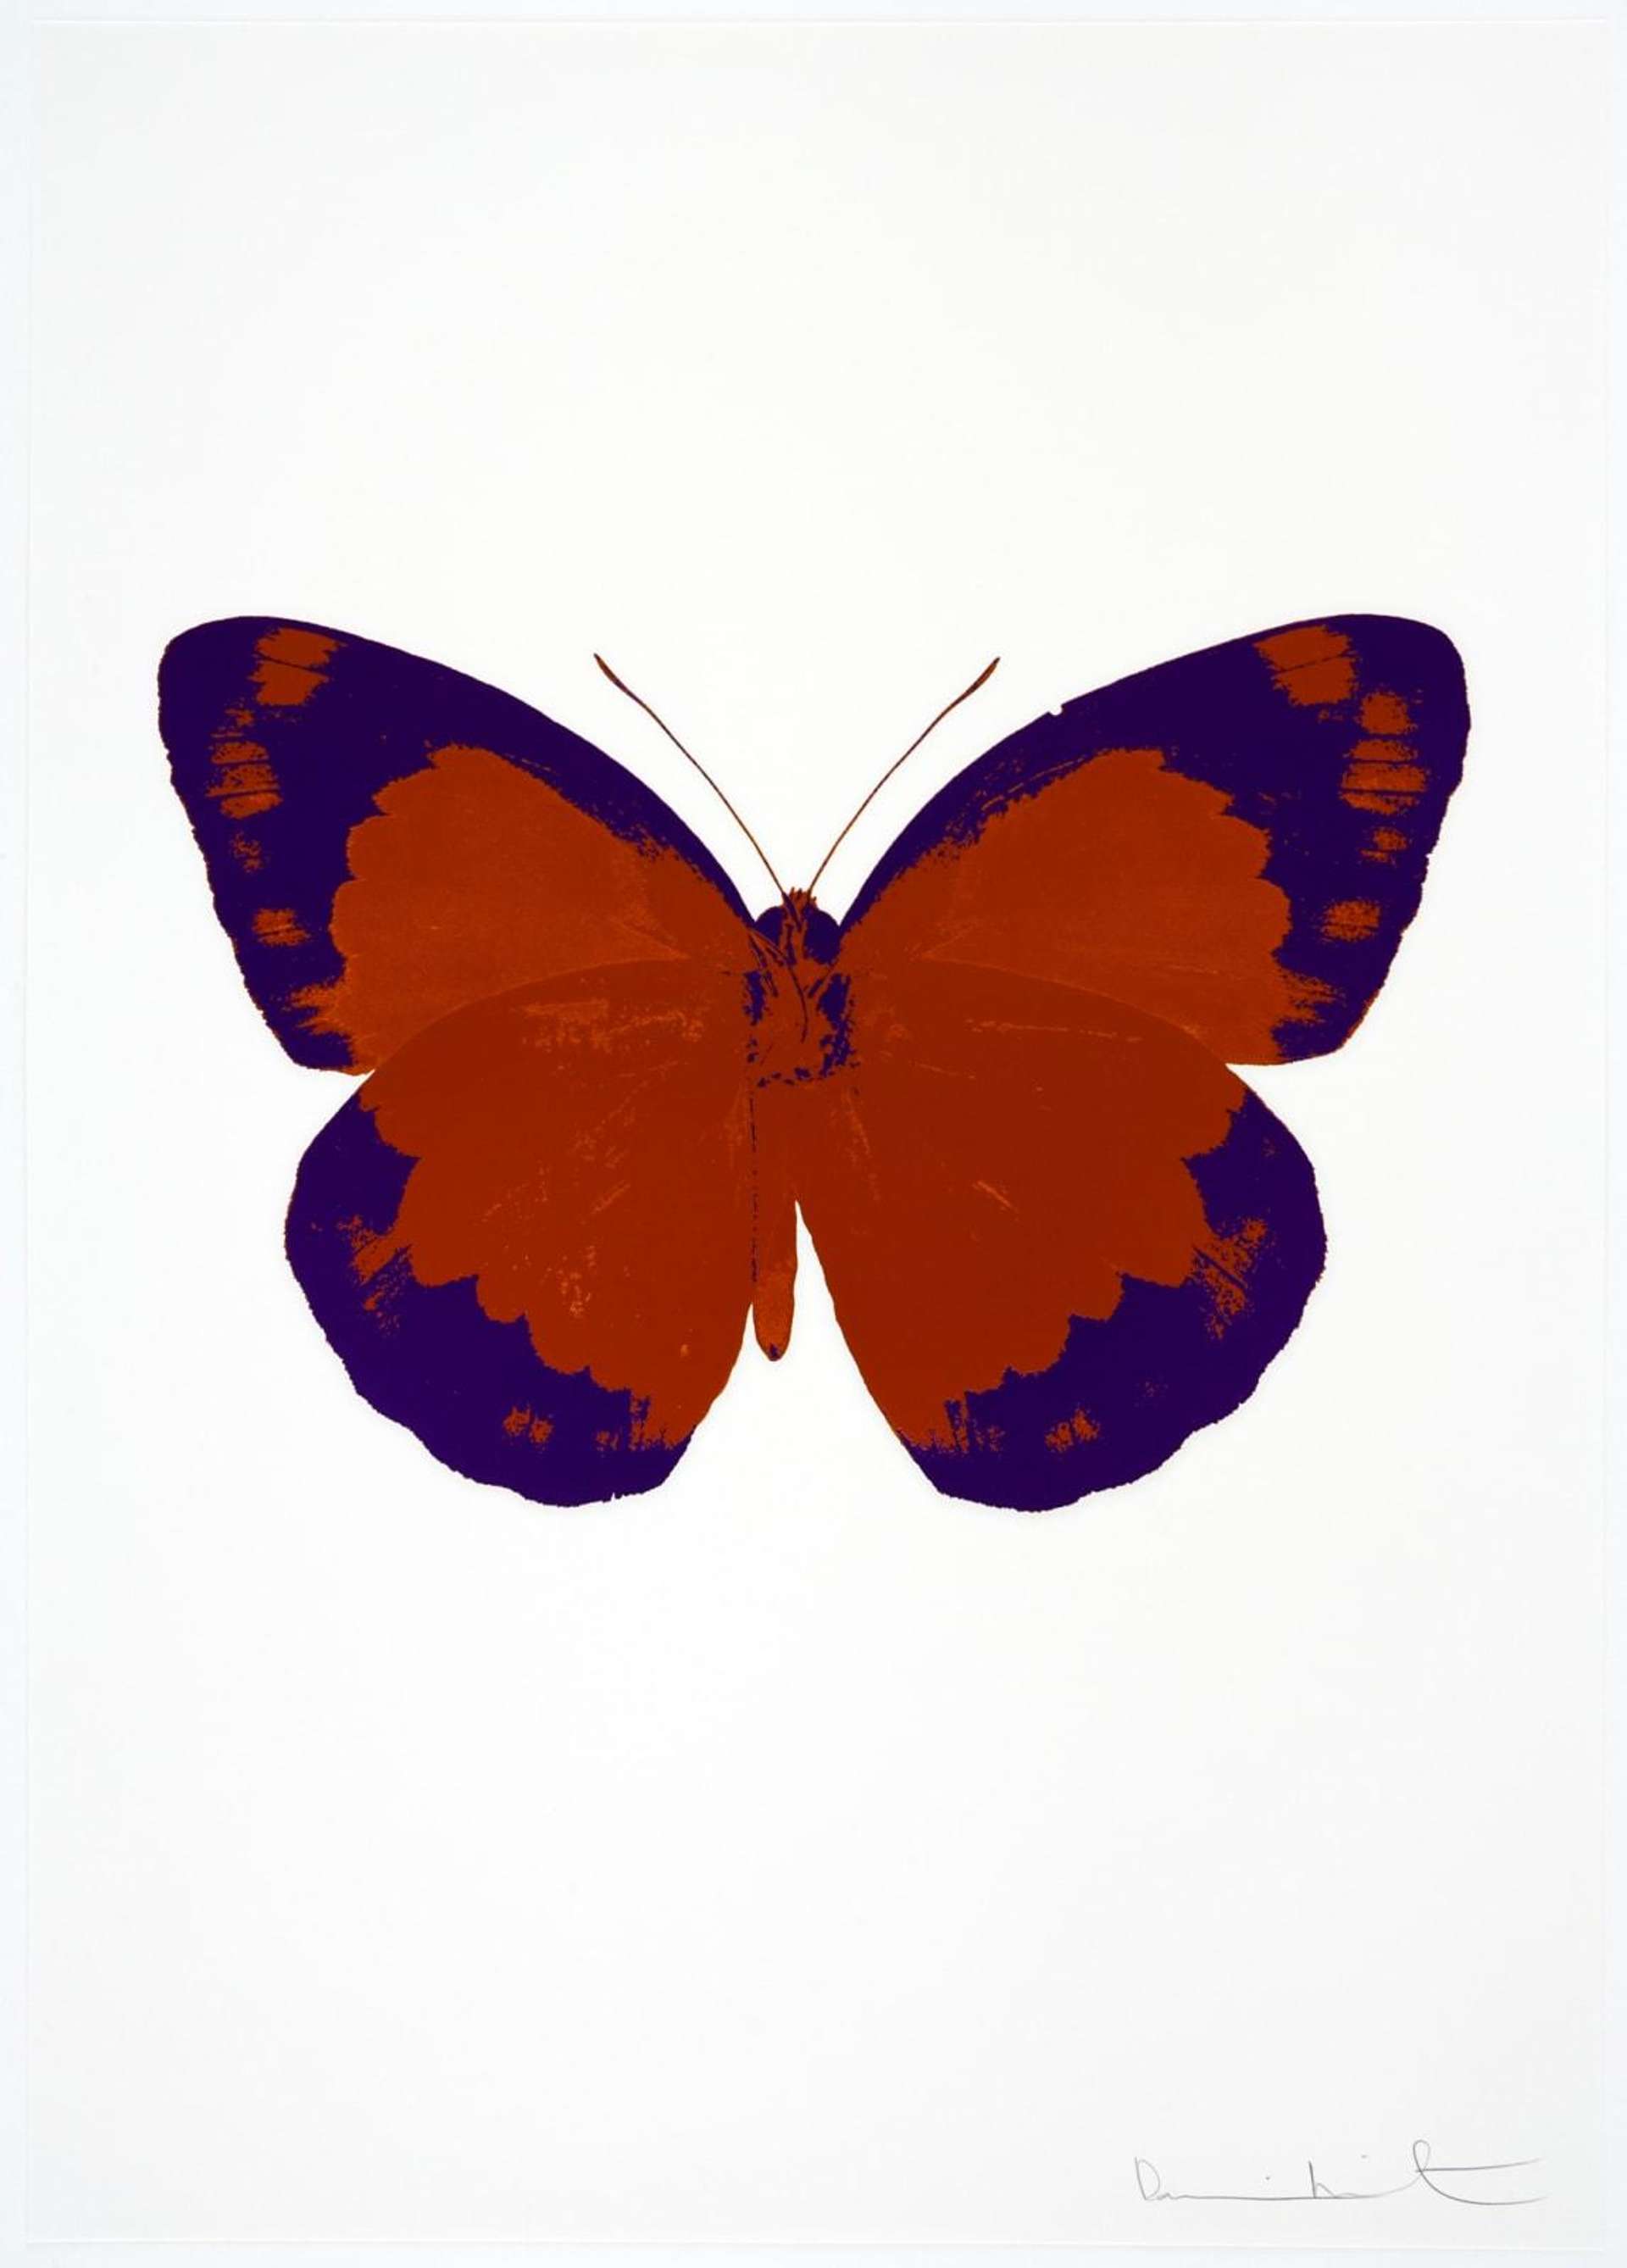 Damien Hirst: The Souls II (prairie copper, imperial purple, blind impression) - Signed Print